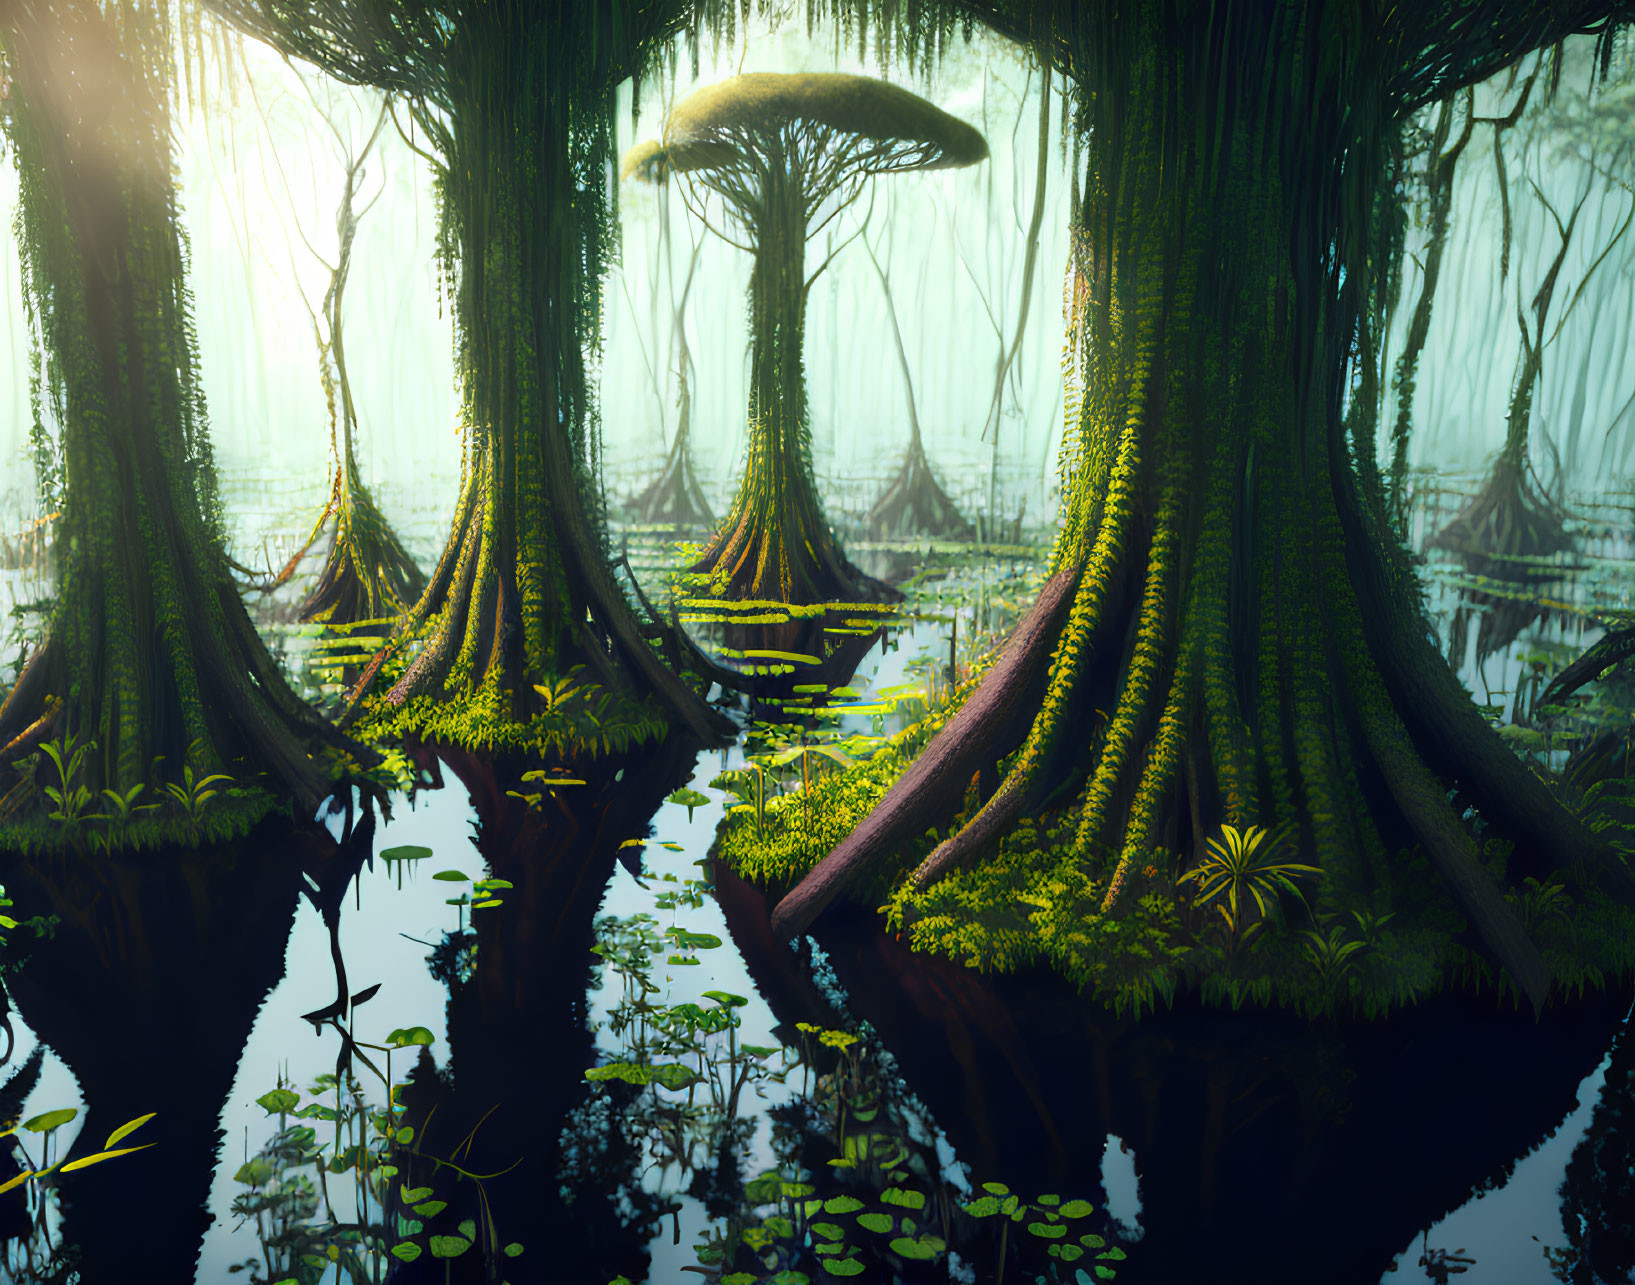 Futuristic swamp landscape with towering trees, large mushroom, and misty atmosphere